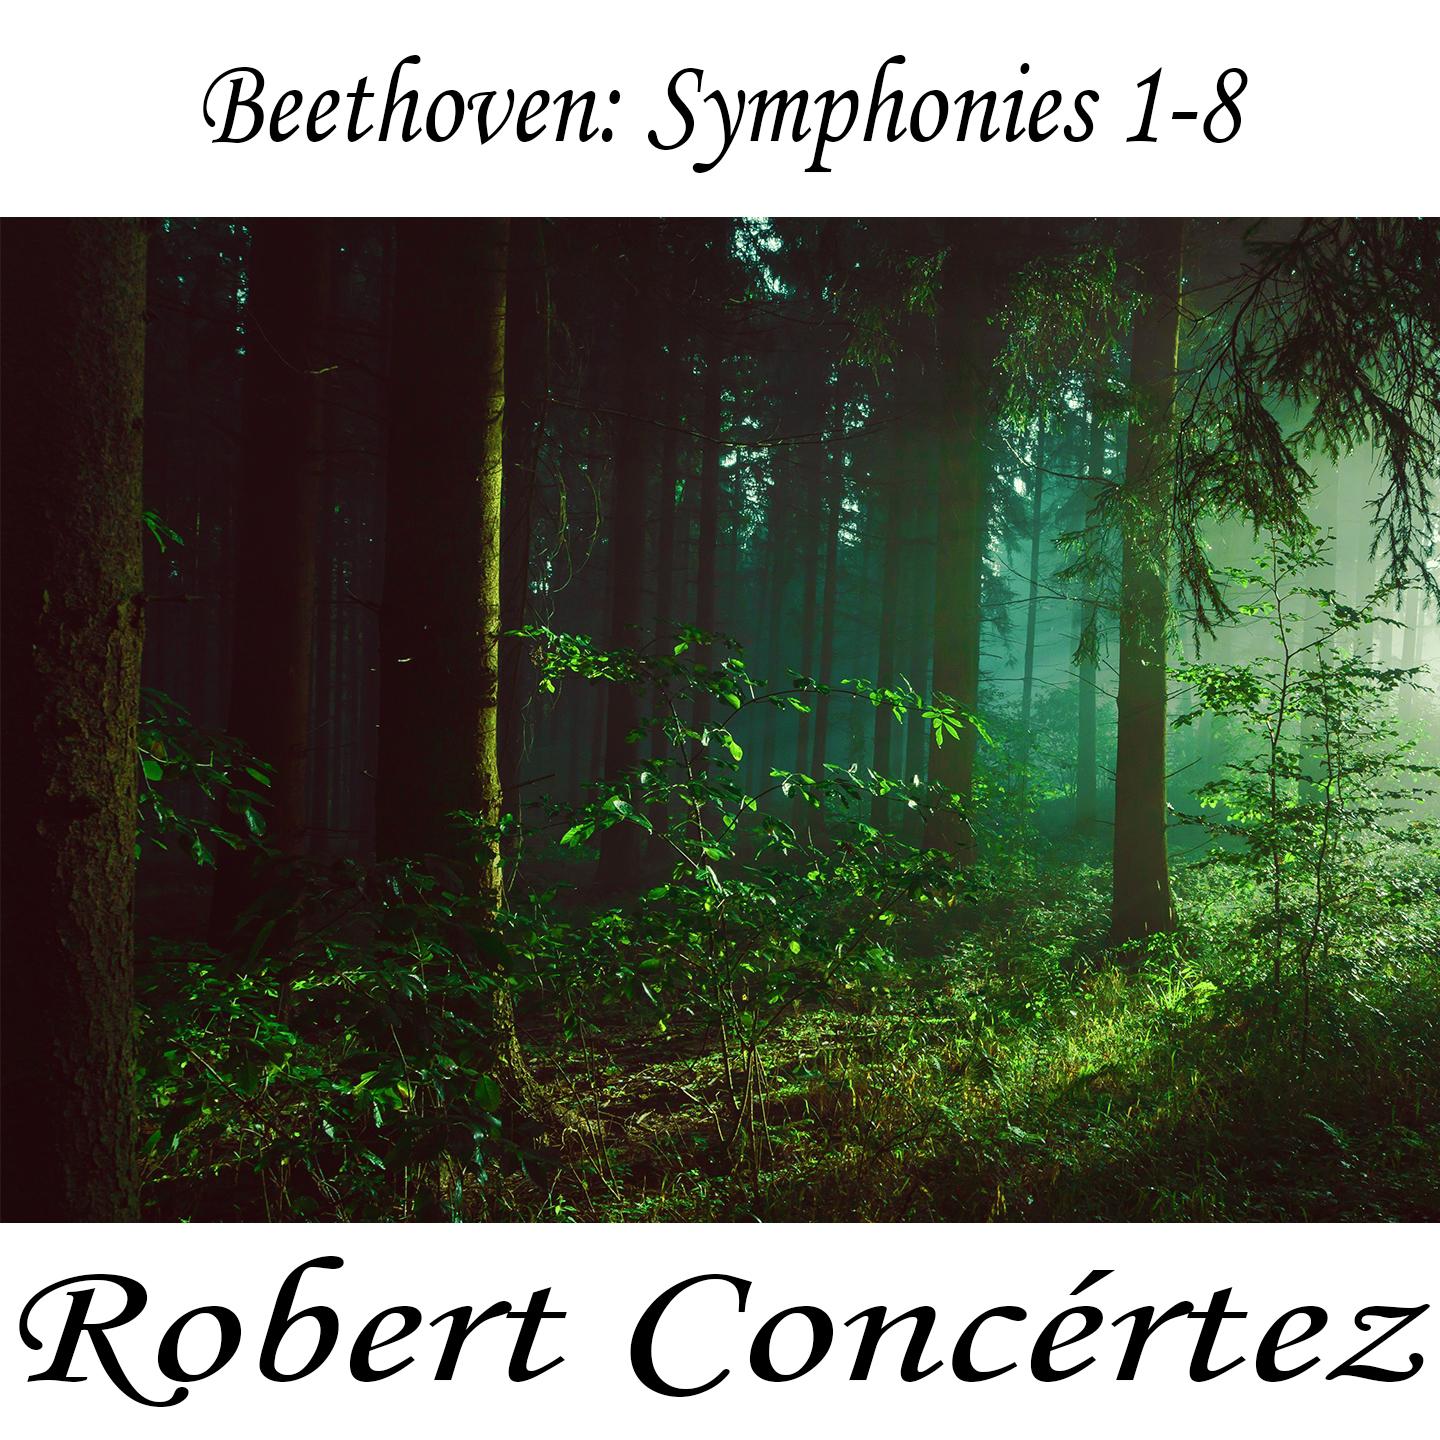 Beethoven: Symphony No- 6 in F Major, Op- 68 Pastorale I- Awakening of Cheerful Feelings Upon Arrival in the Country- Allegro ma non troppo